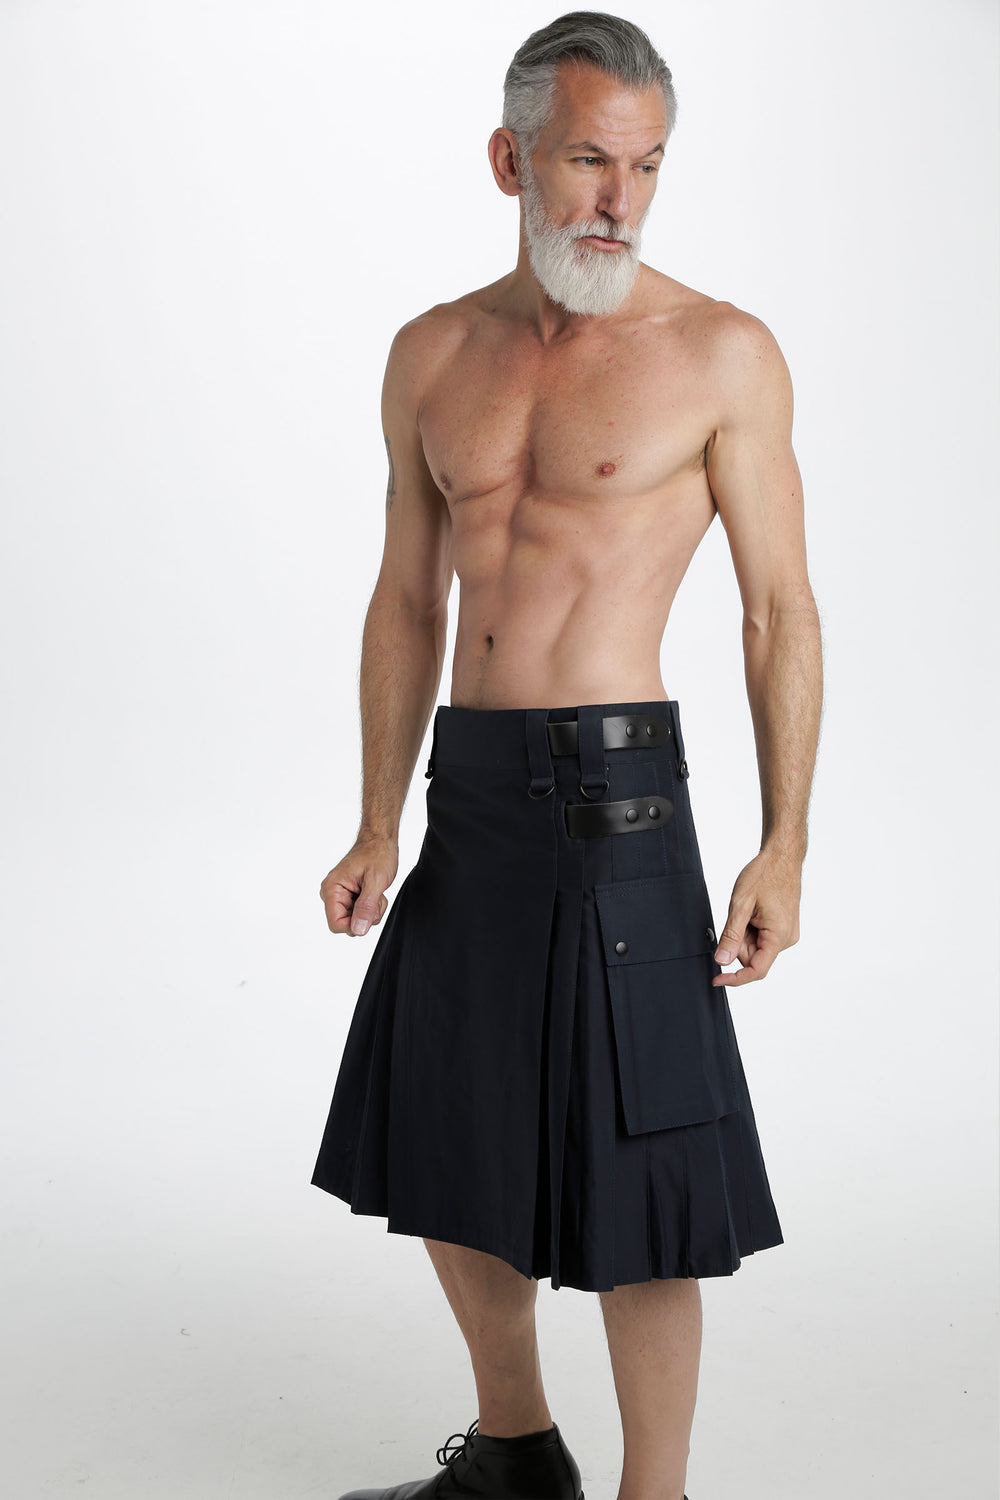 	 We sell Mens Utility Kilt, designed for modern men from any walk of life and all body types. This Kilt comes in different colors and especially custom made to match our customers.